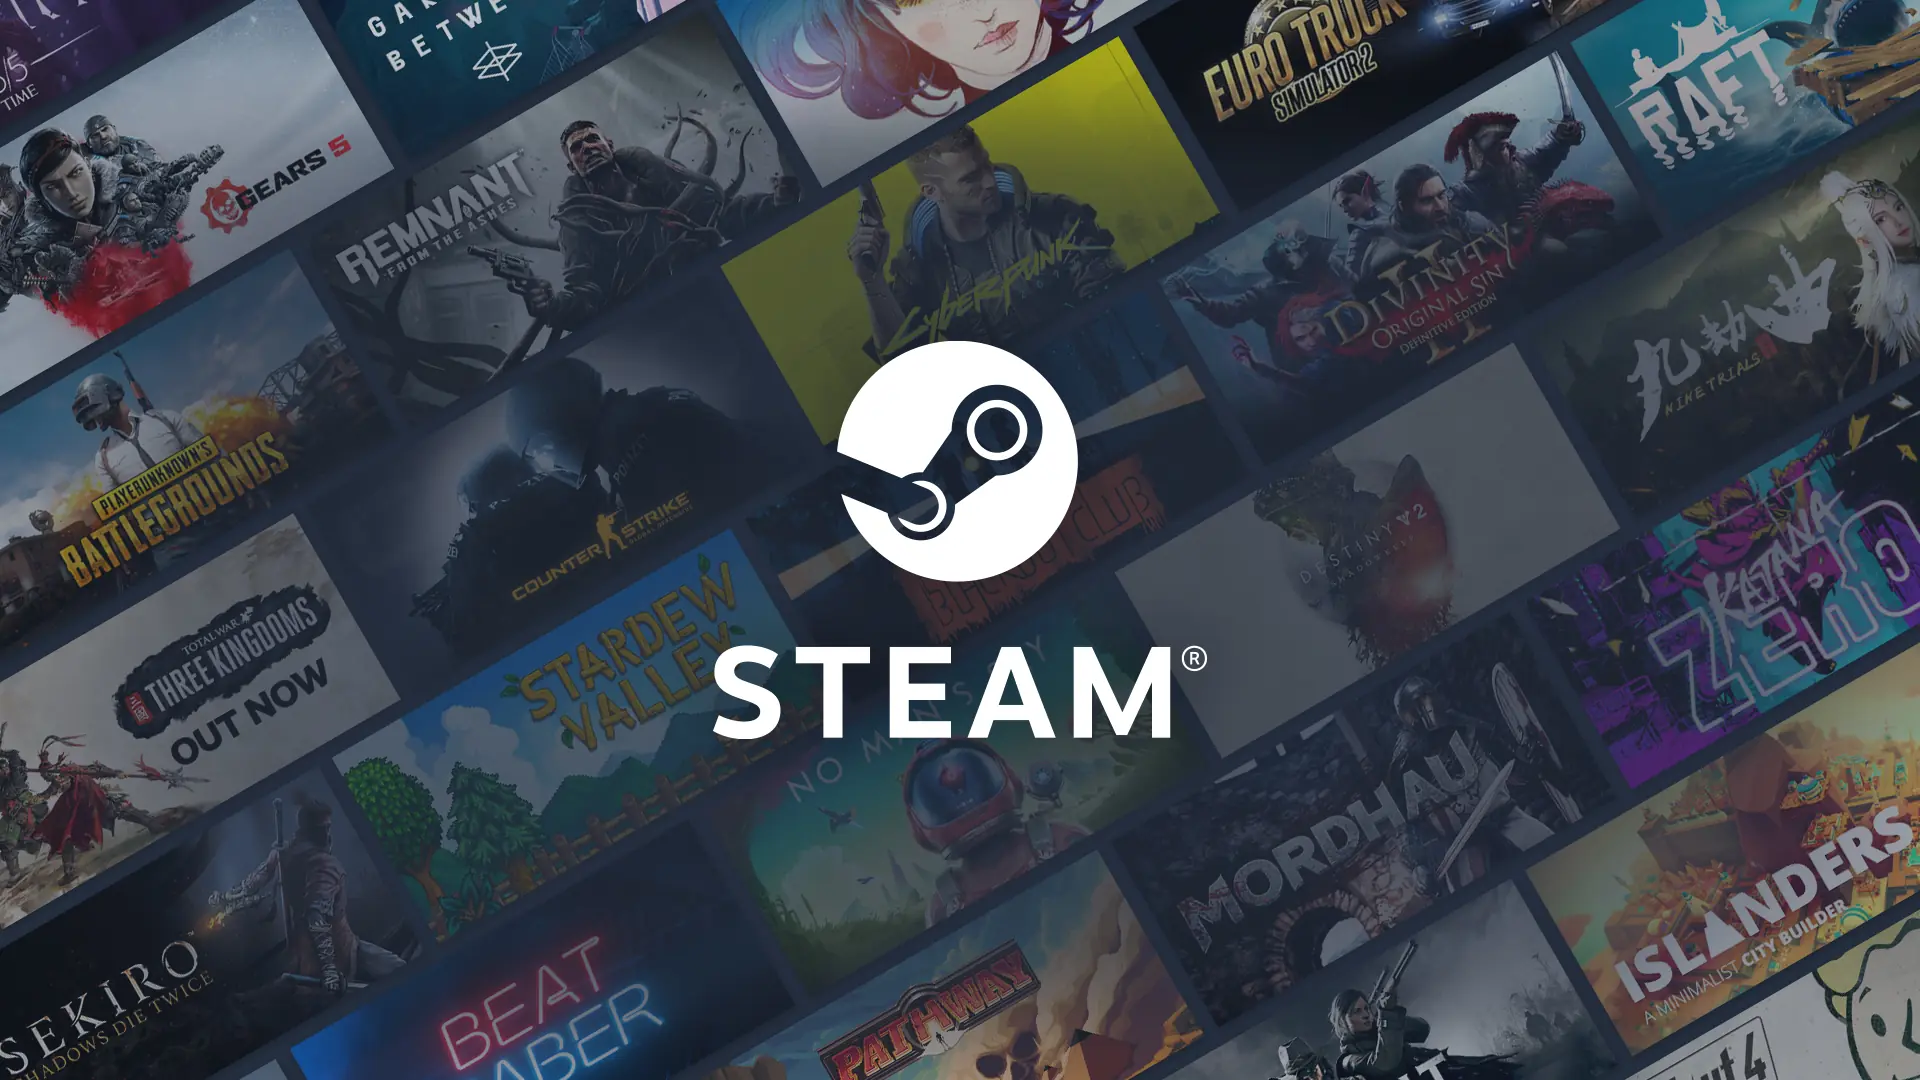 Steam Banner image with many game titles